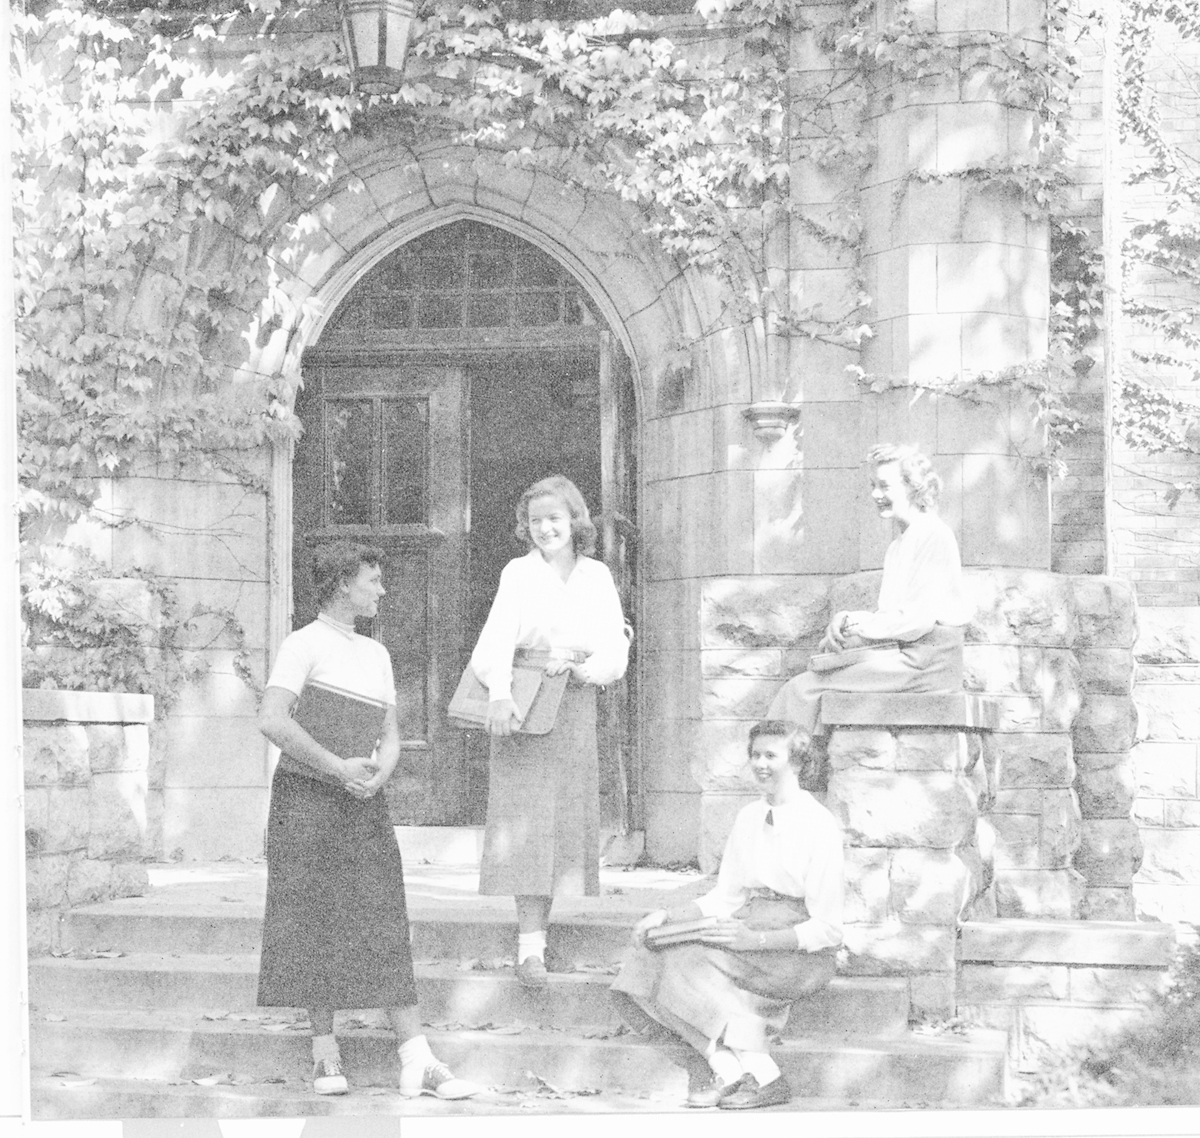 Historical image of two female students walking through the arched stone entryway of a main campus building.